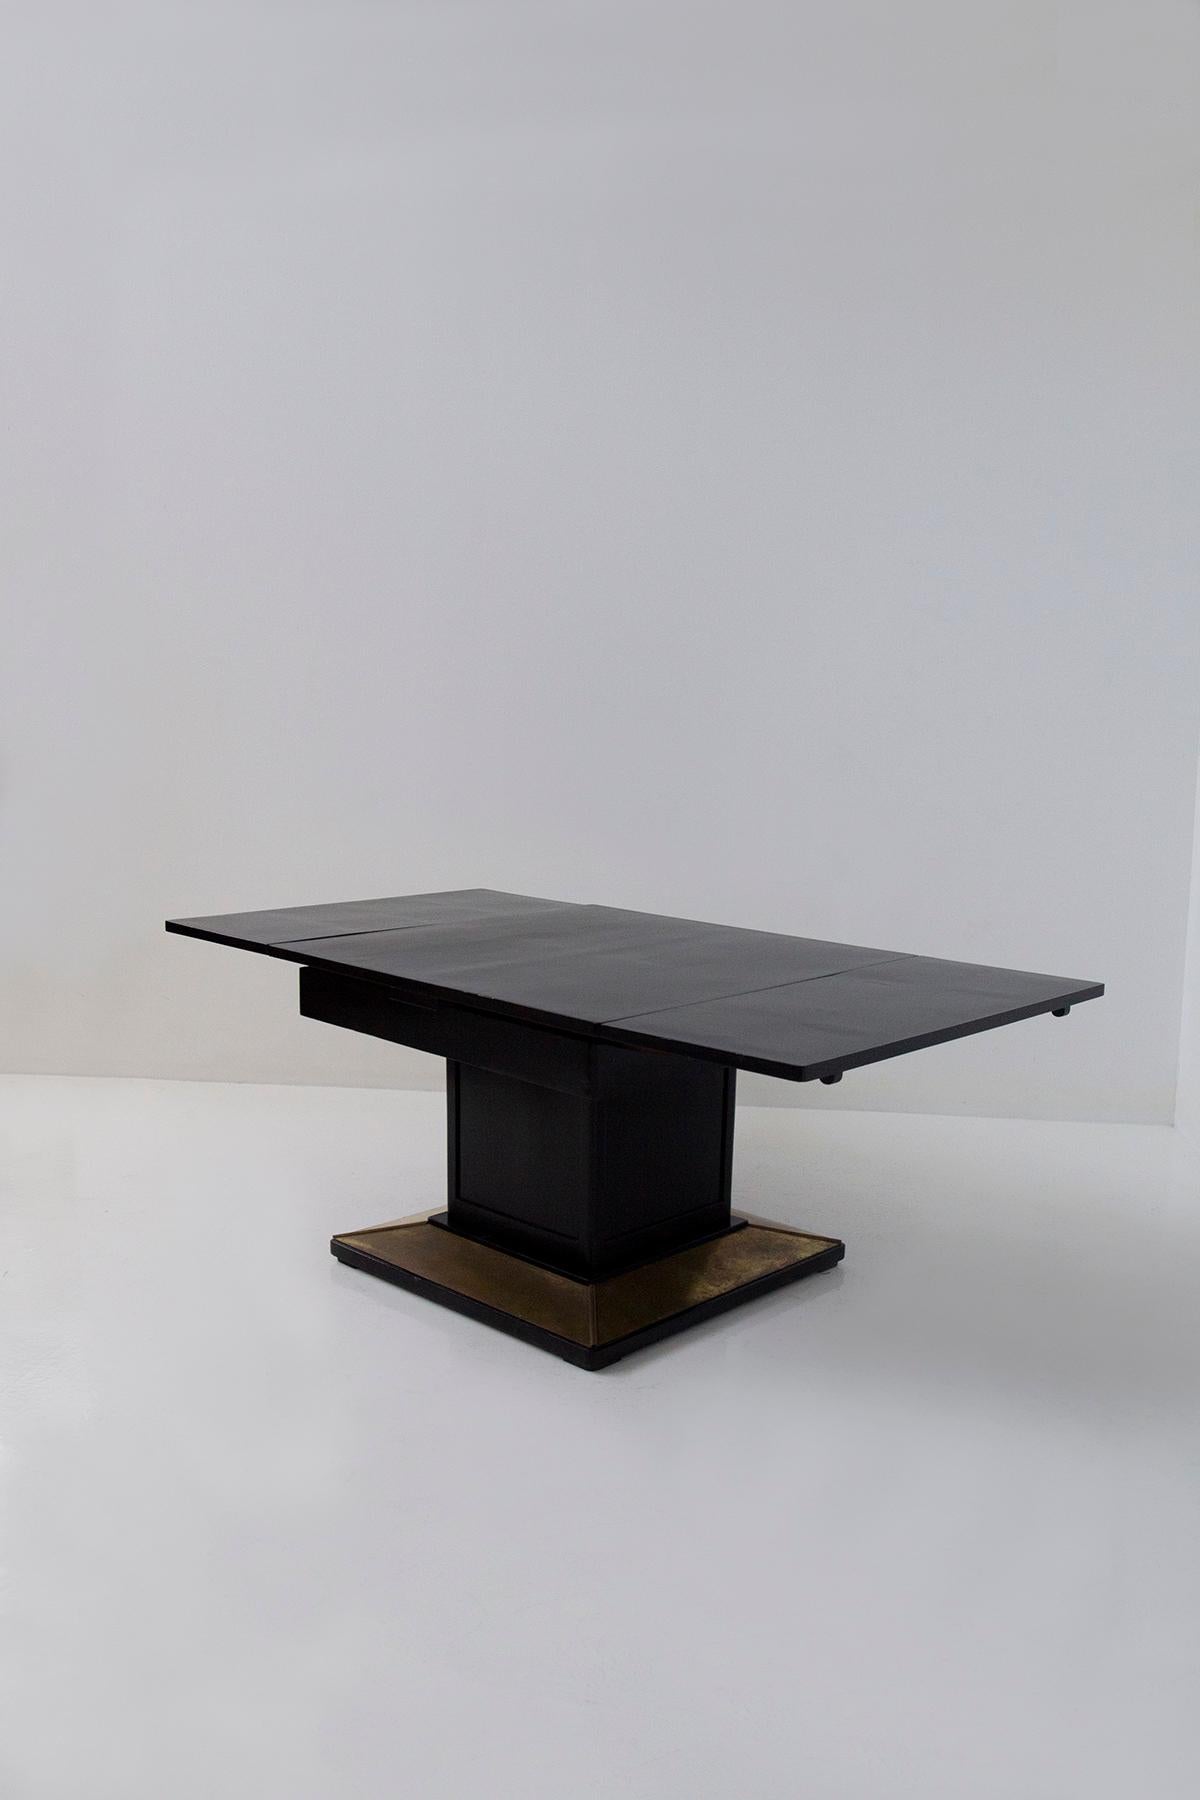 European Dining table by Josef Hoffmann un wood and brass, label